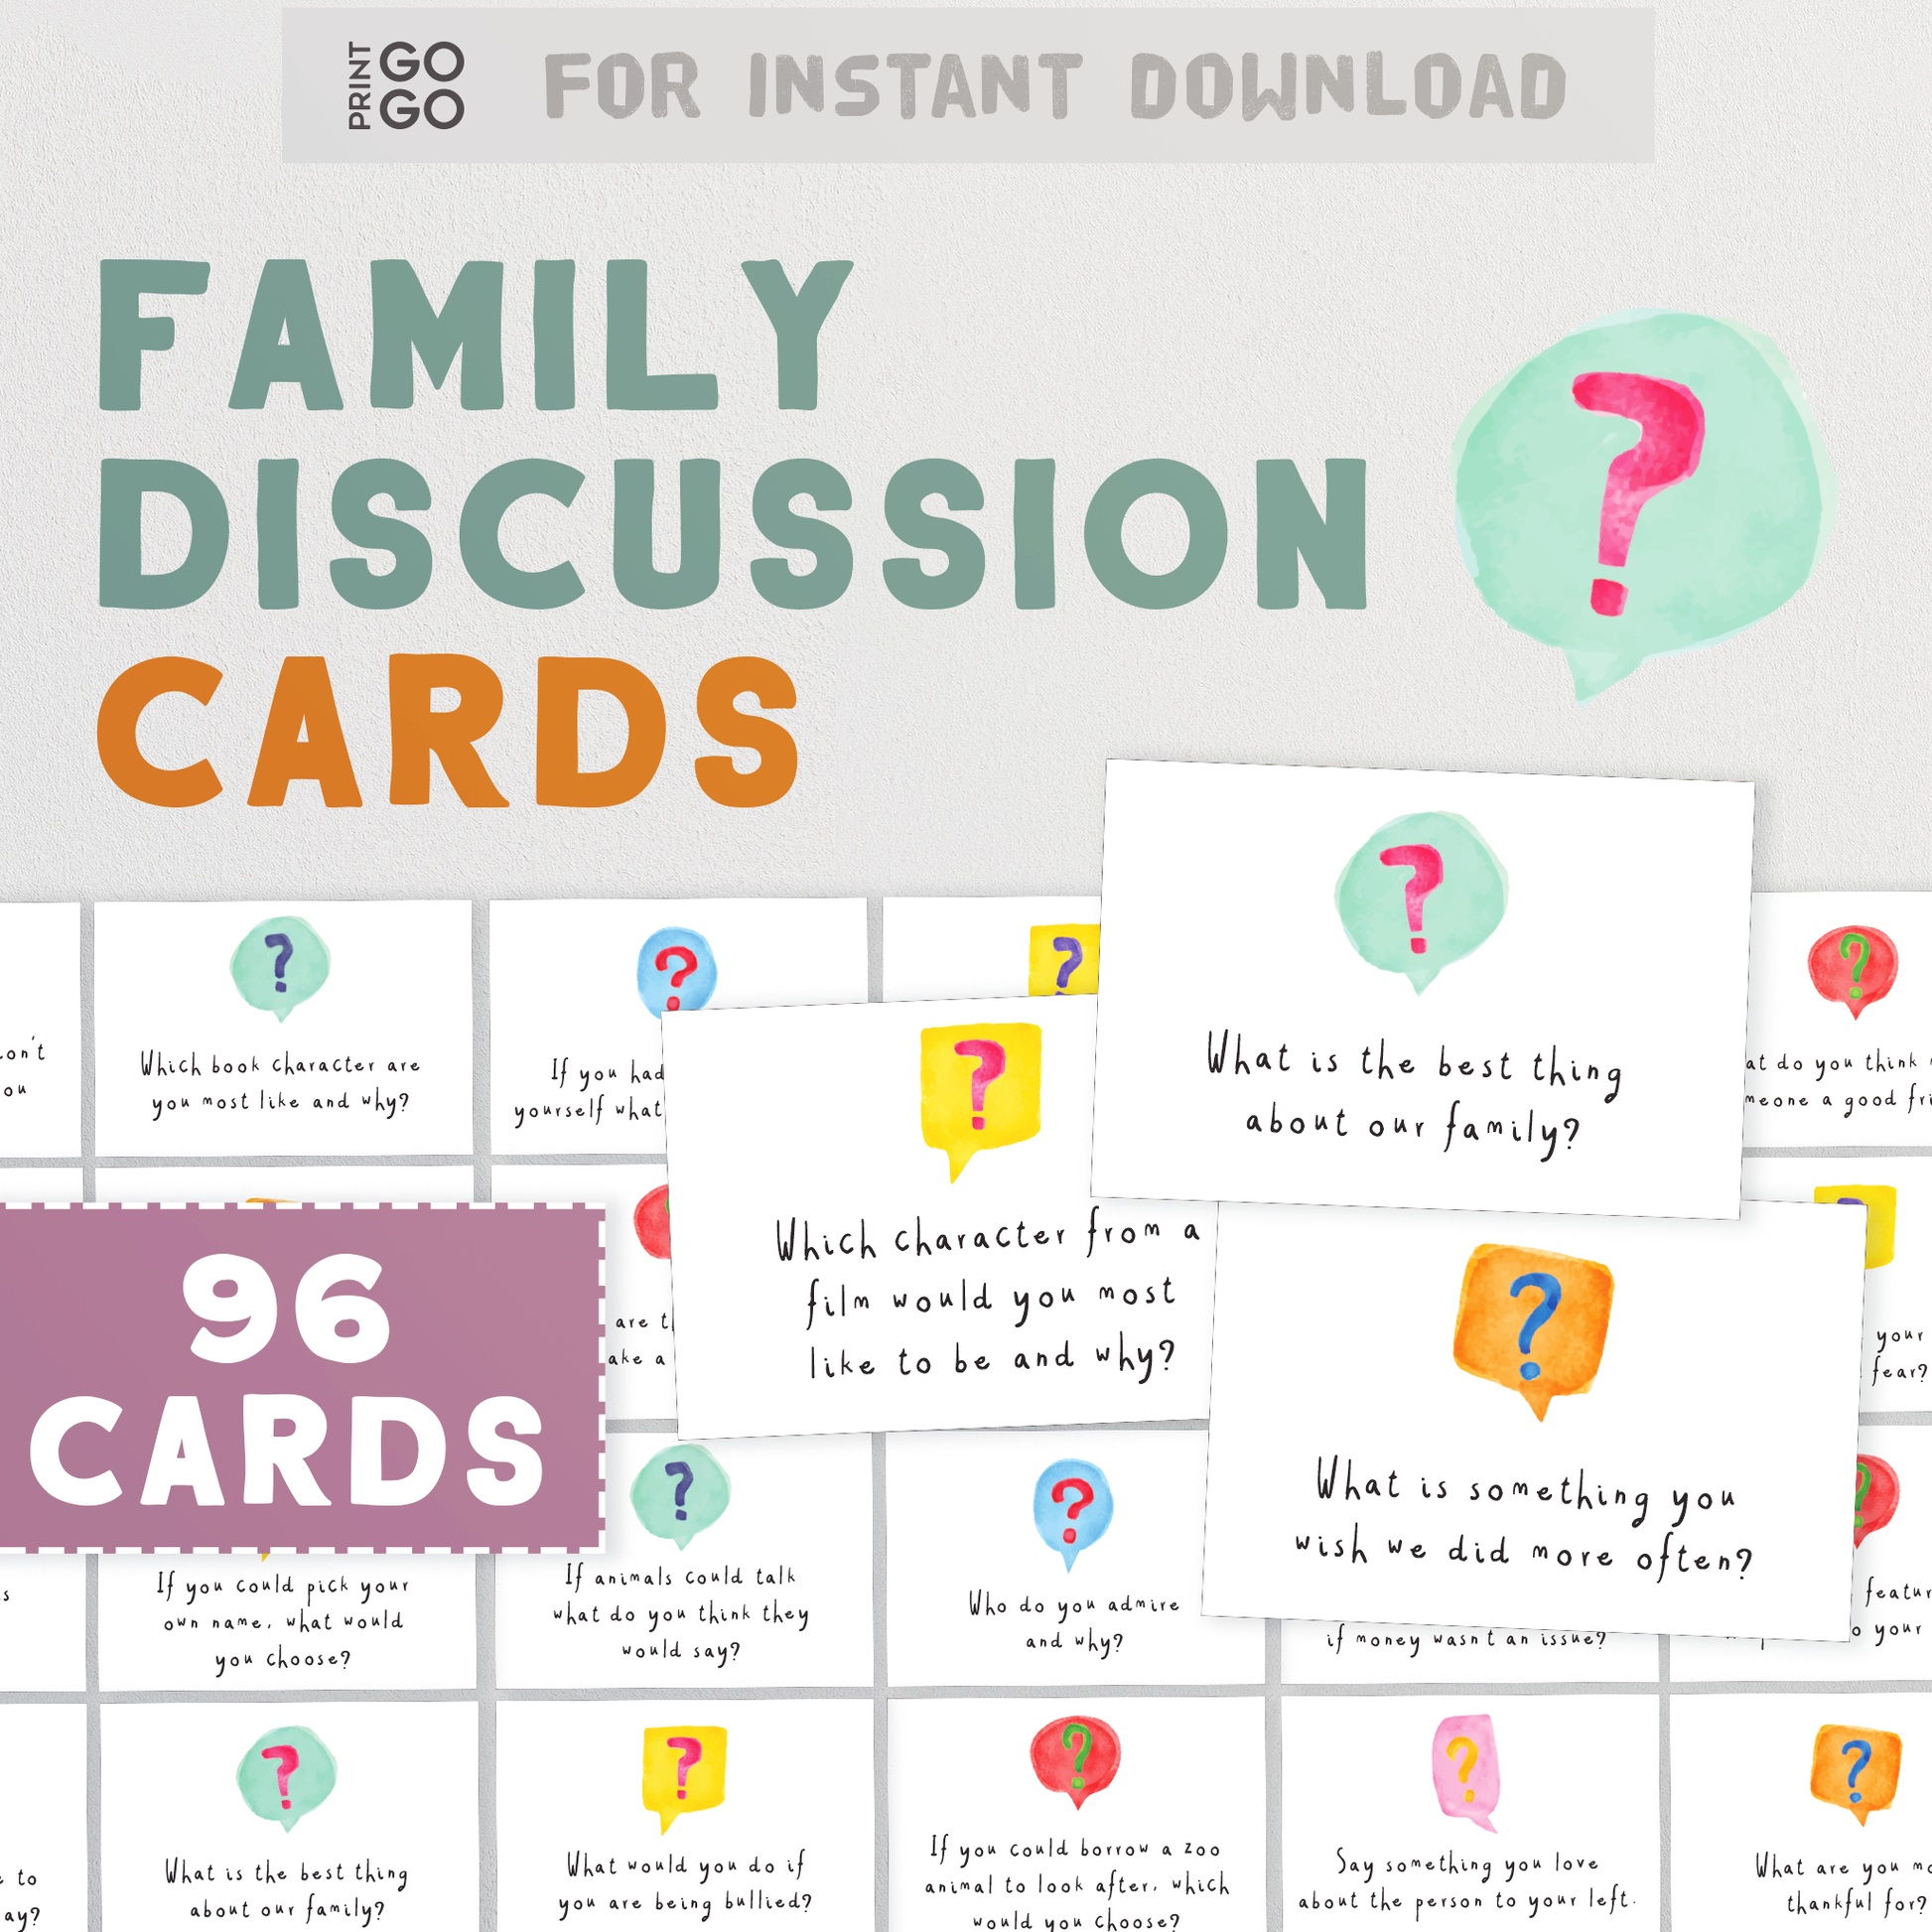 Family Discussion Cards - 96 Conversation Starters to Promote Meaningful Chat